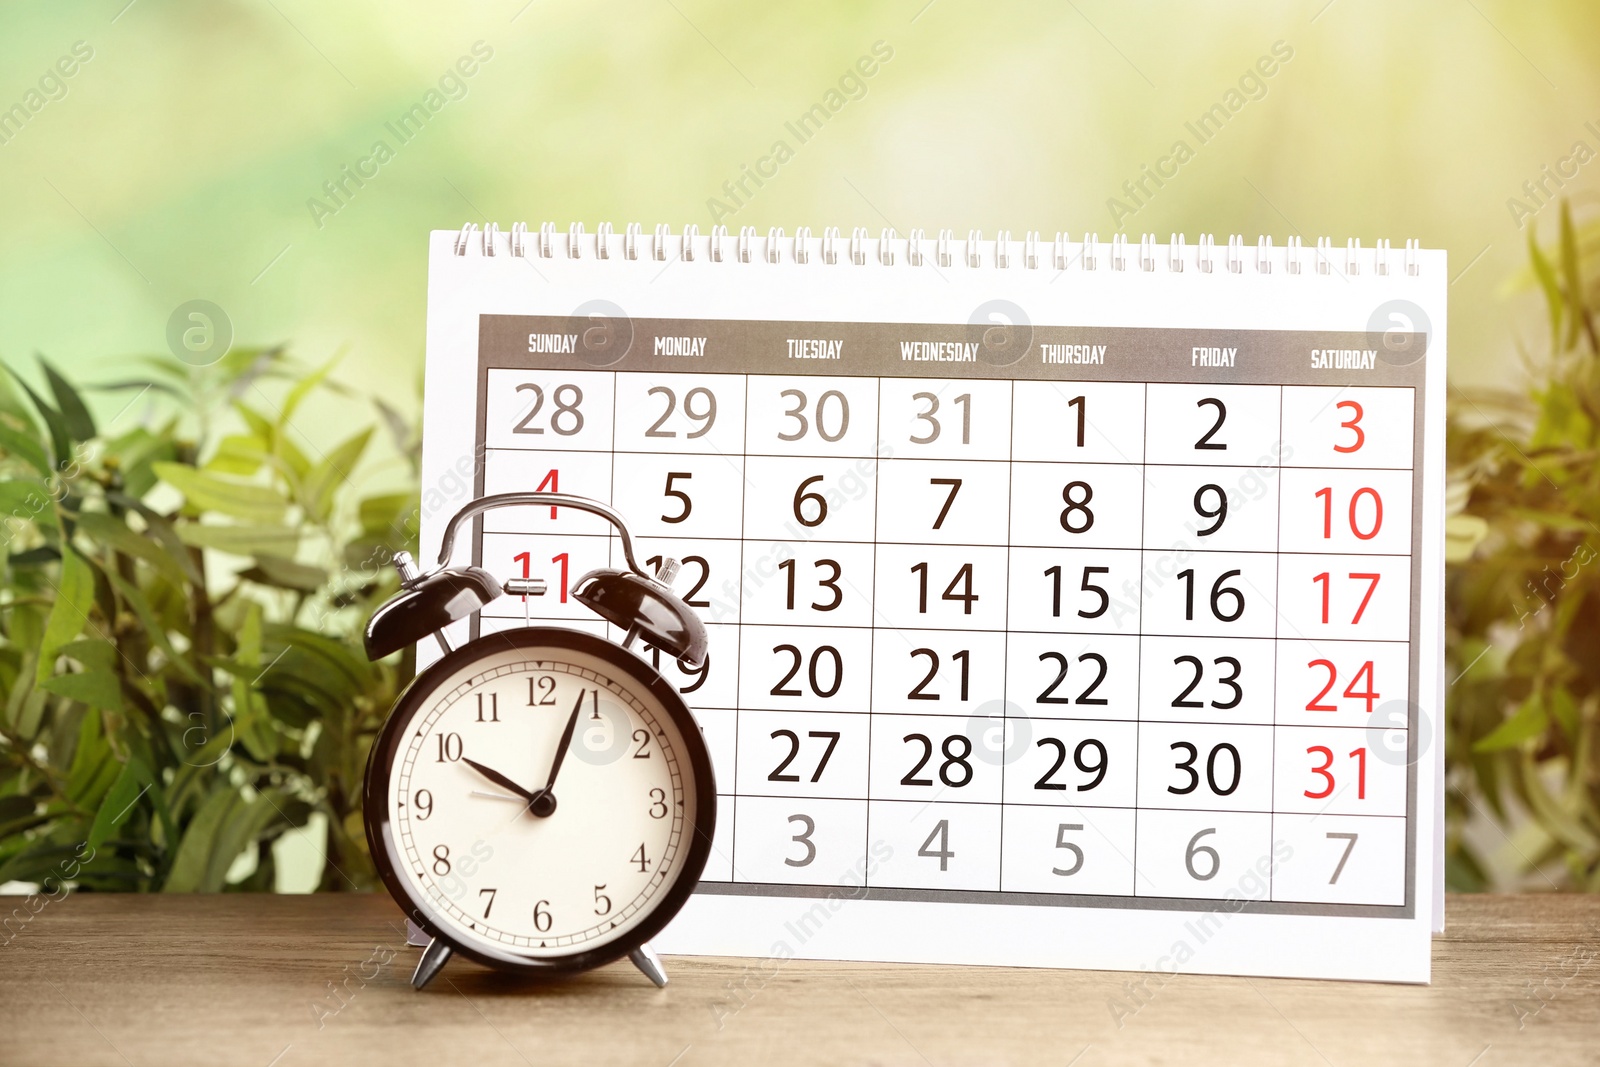 Image of Calendar and alarm clock on wooden table against blurred green background